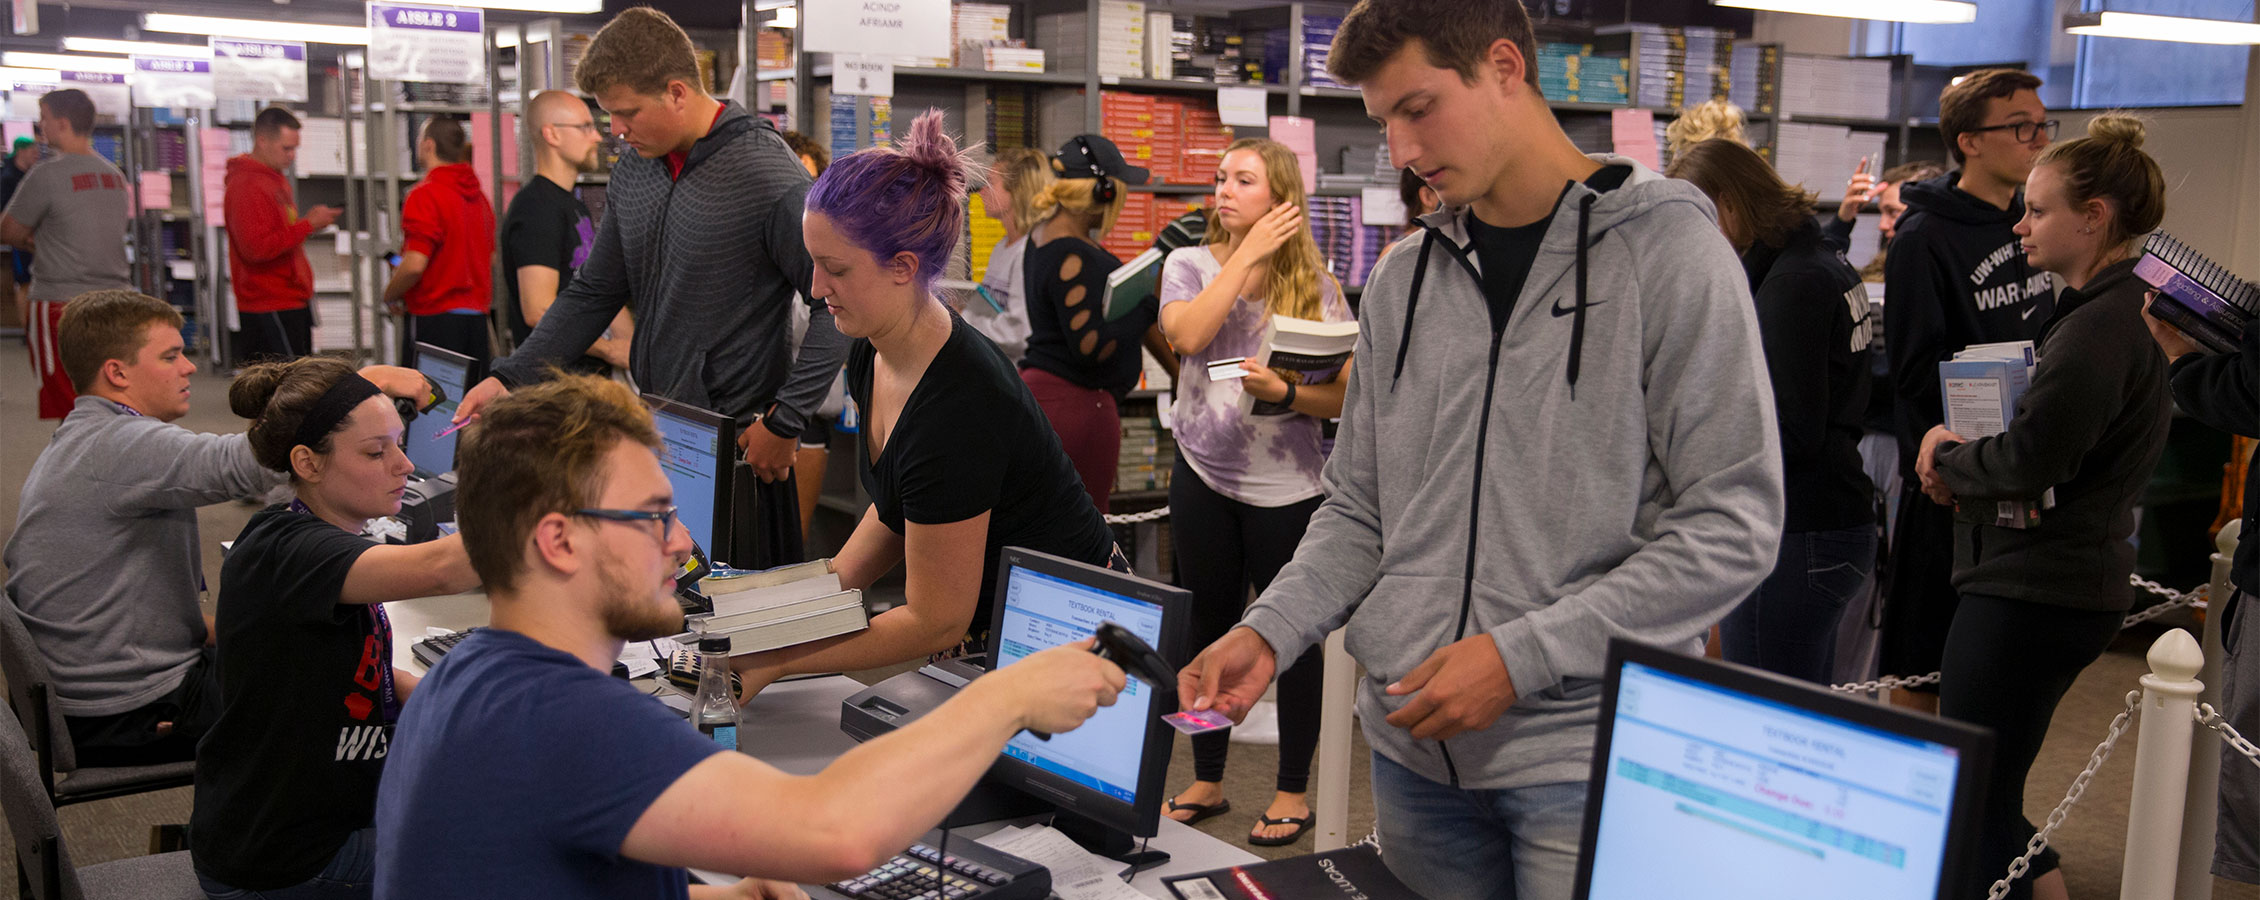 Students check out textbooks on the lower level of the UW-Whitewater bookstore.